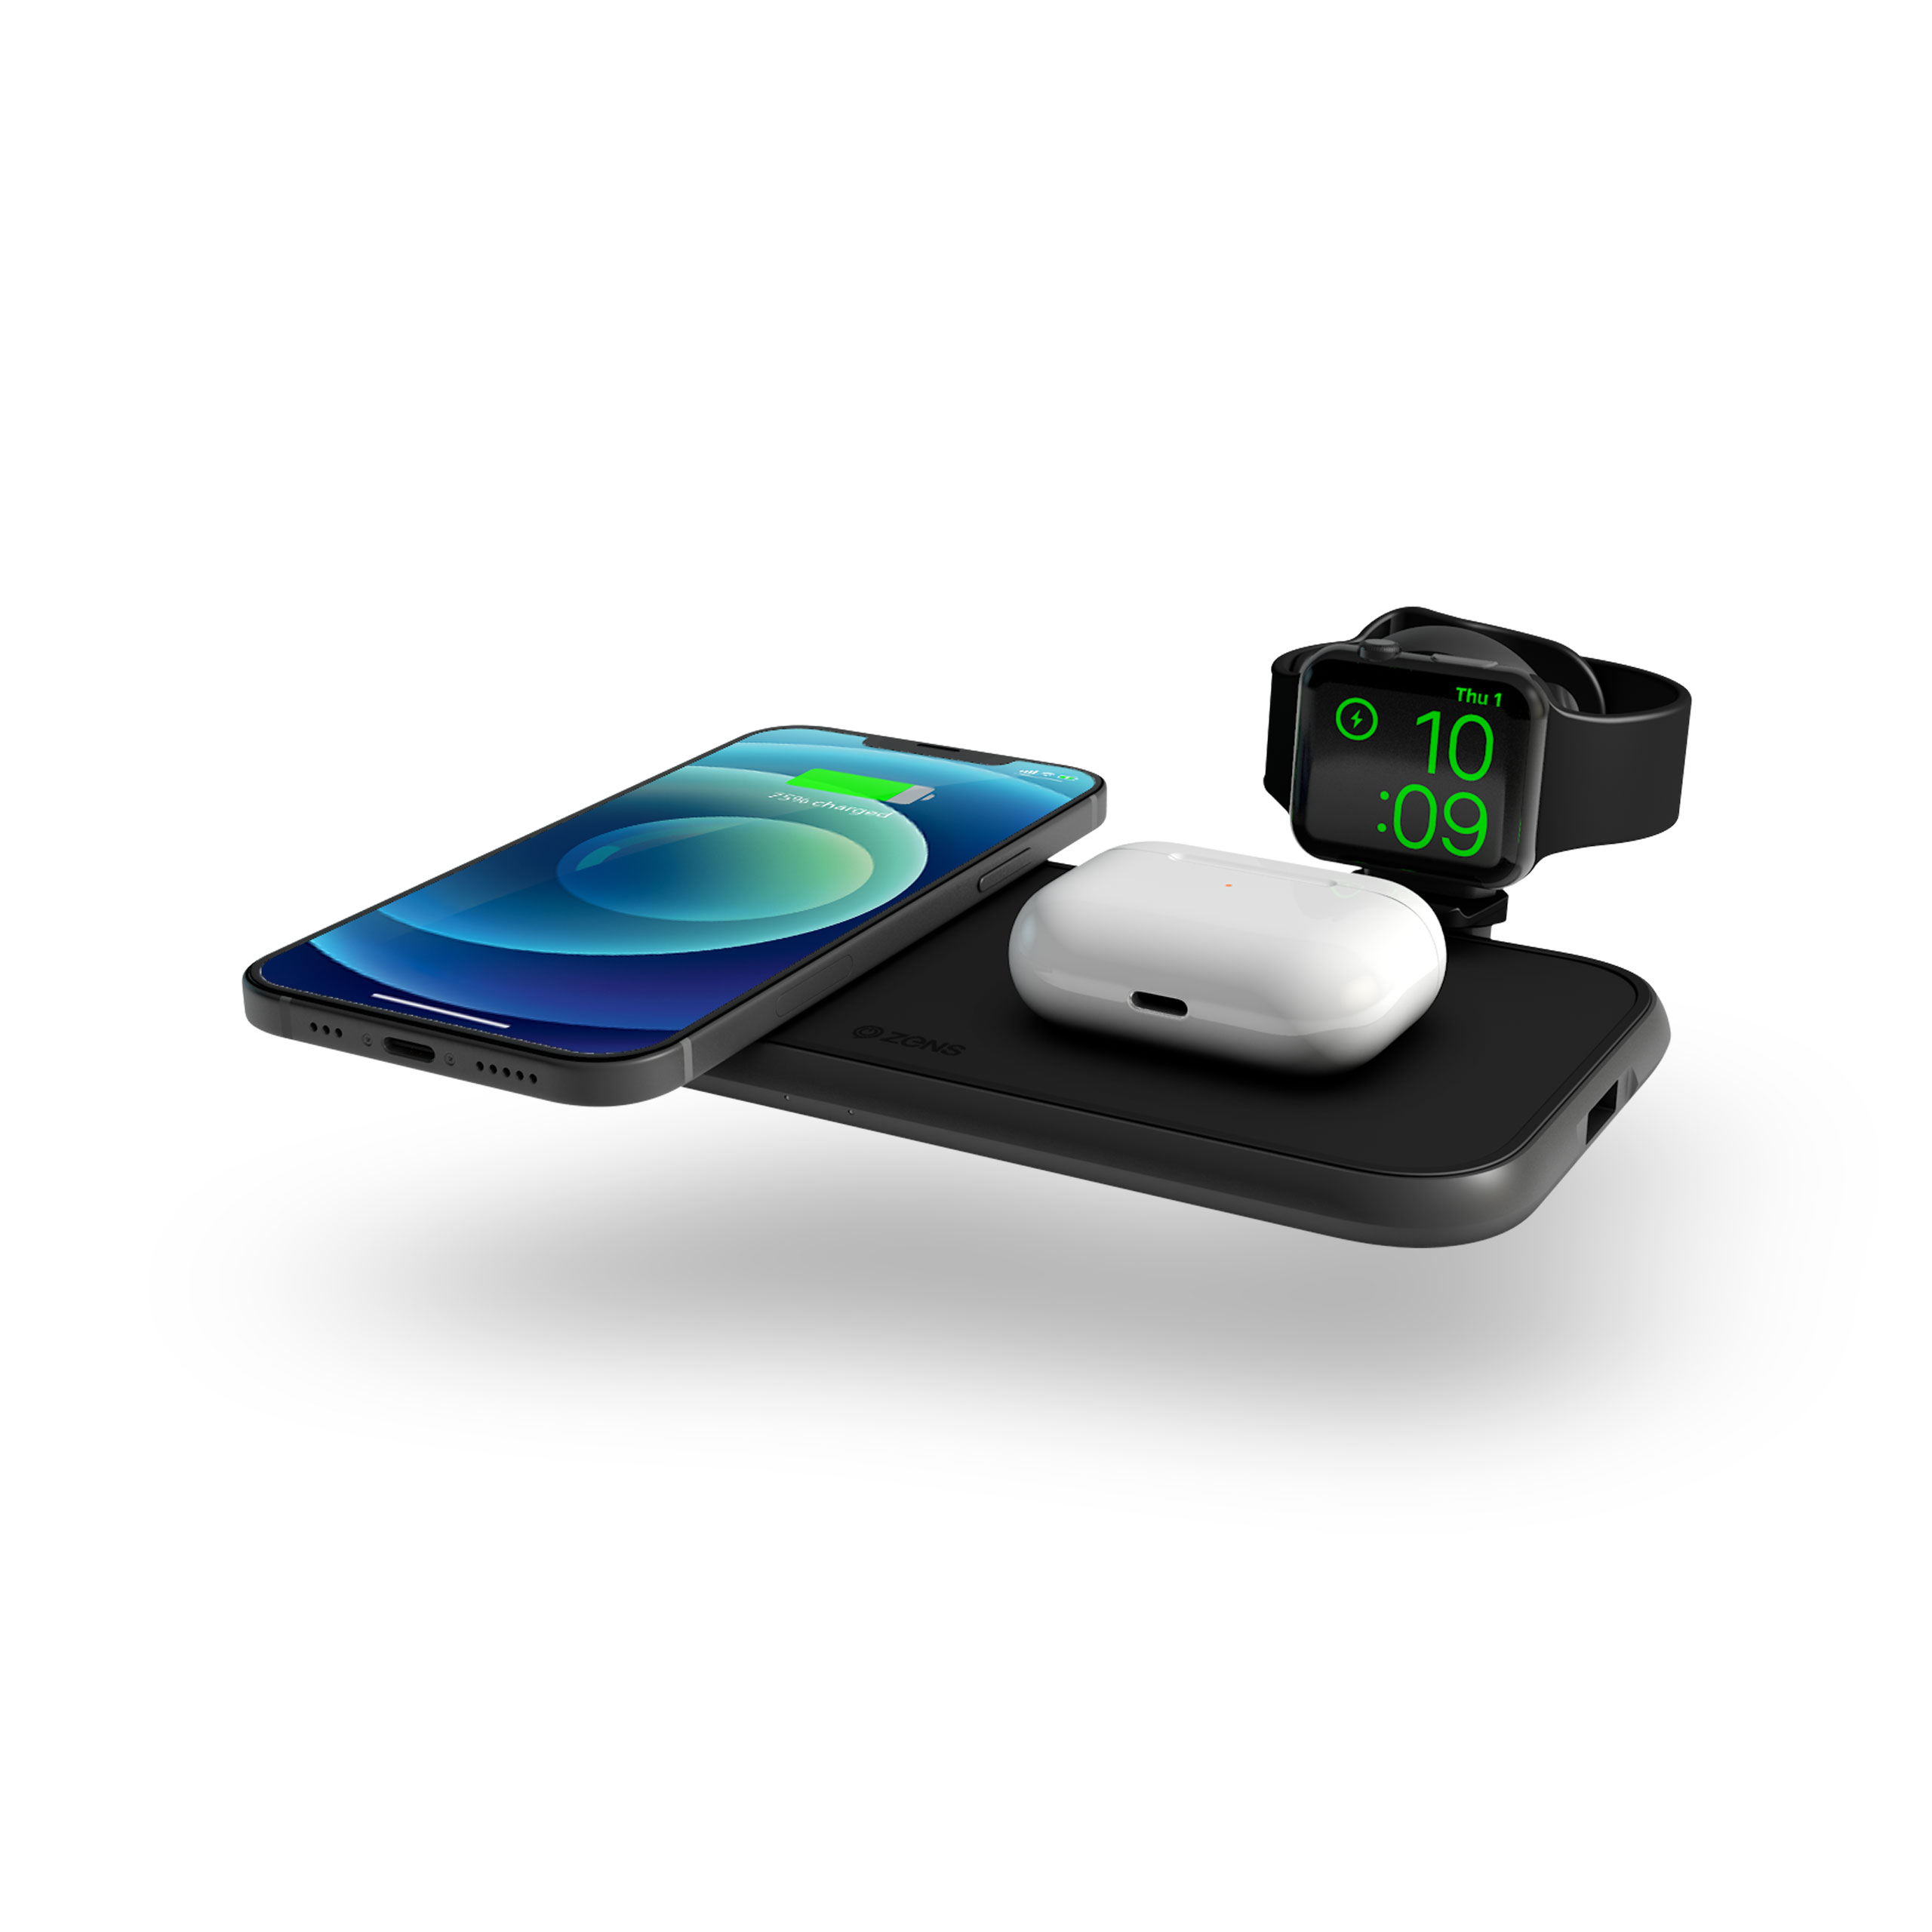 ZEDC14B - Zens 4-in-1 Wireless Charger Aluminium Top Side View with devices